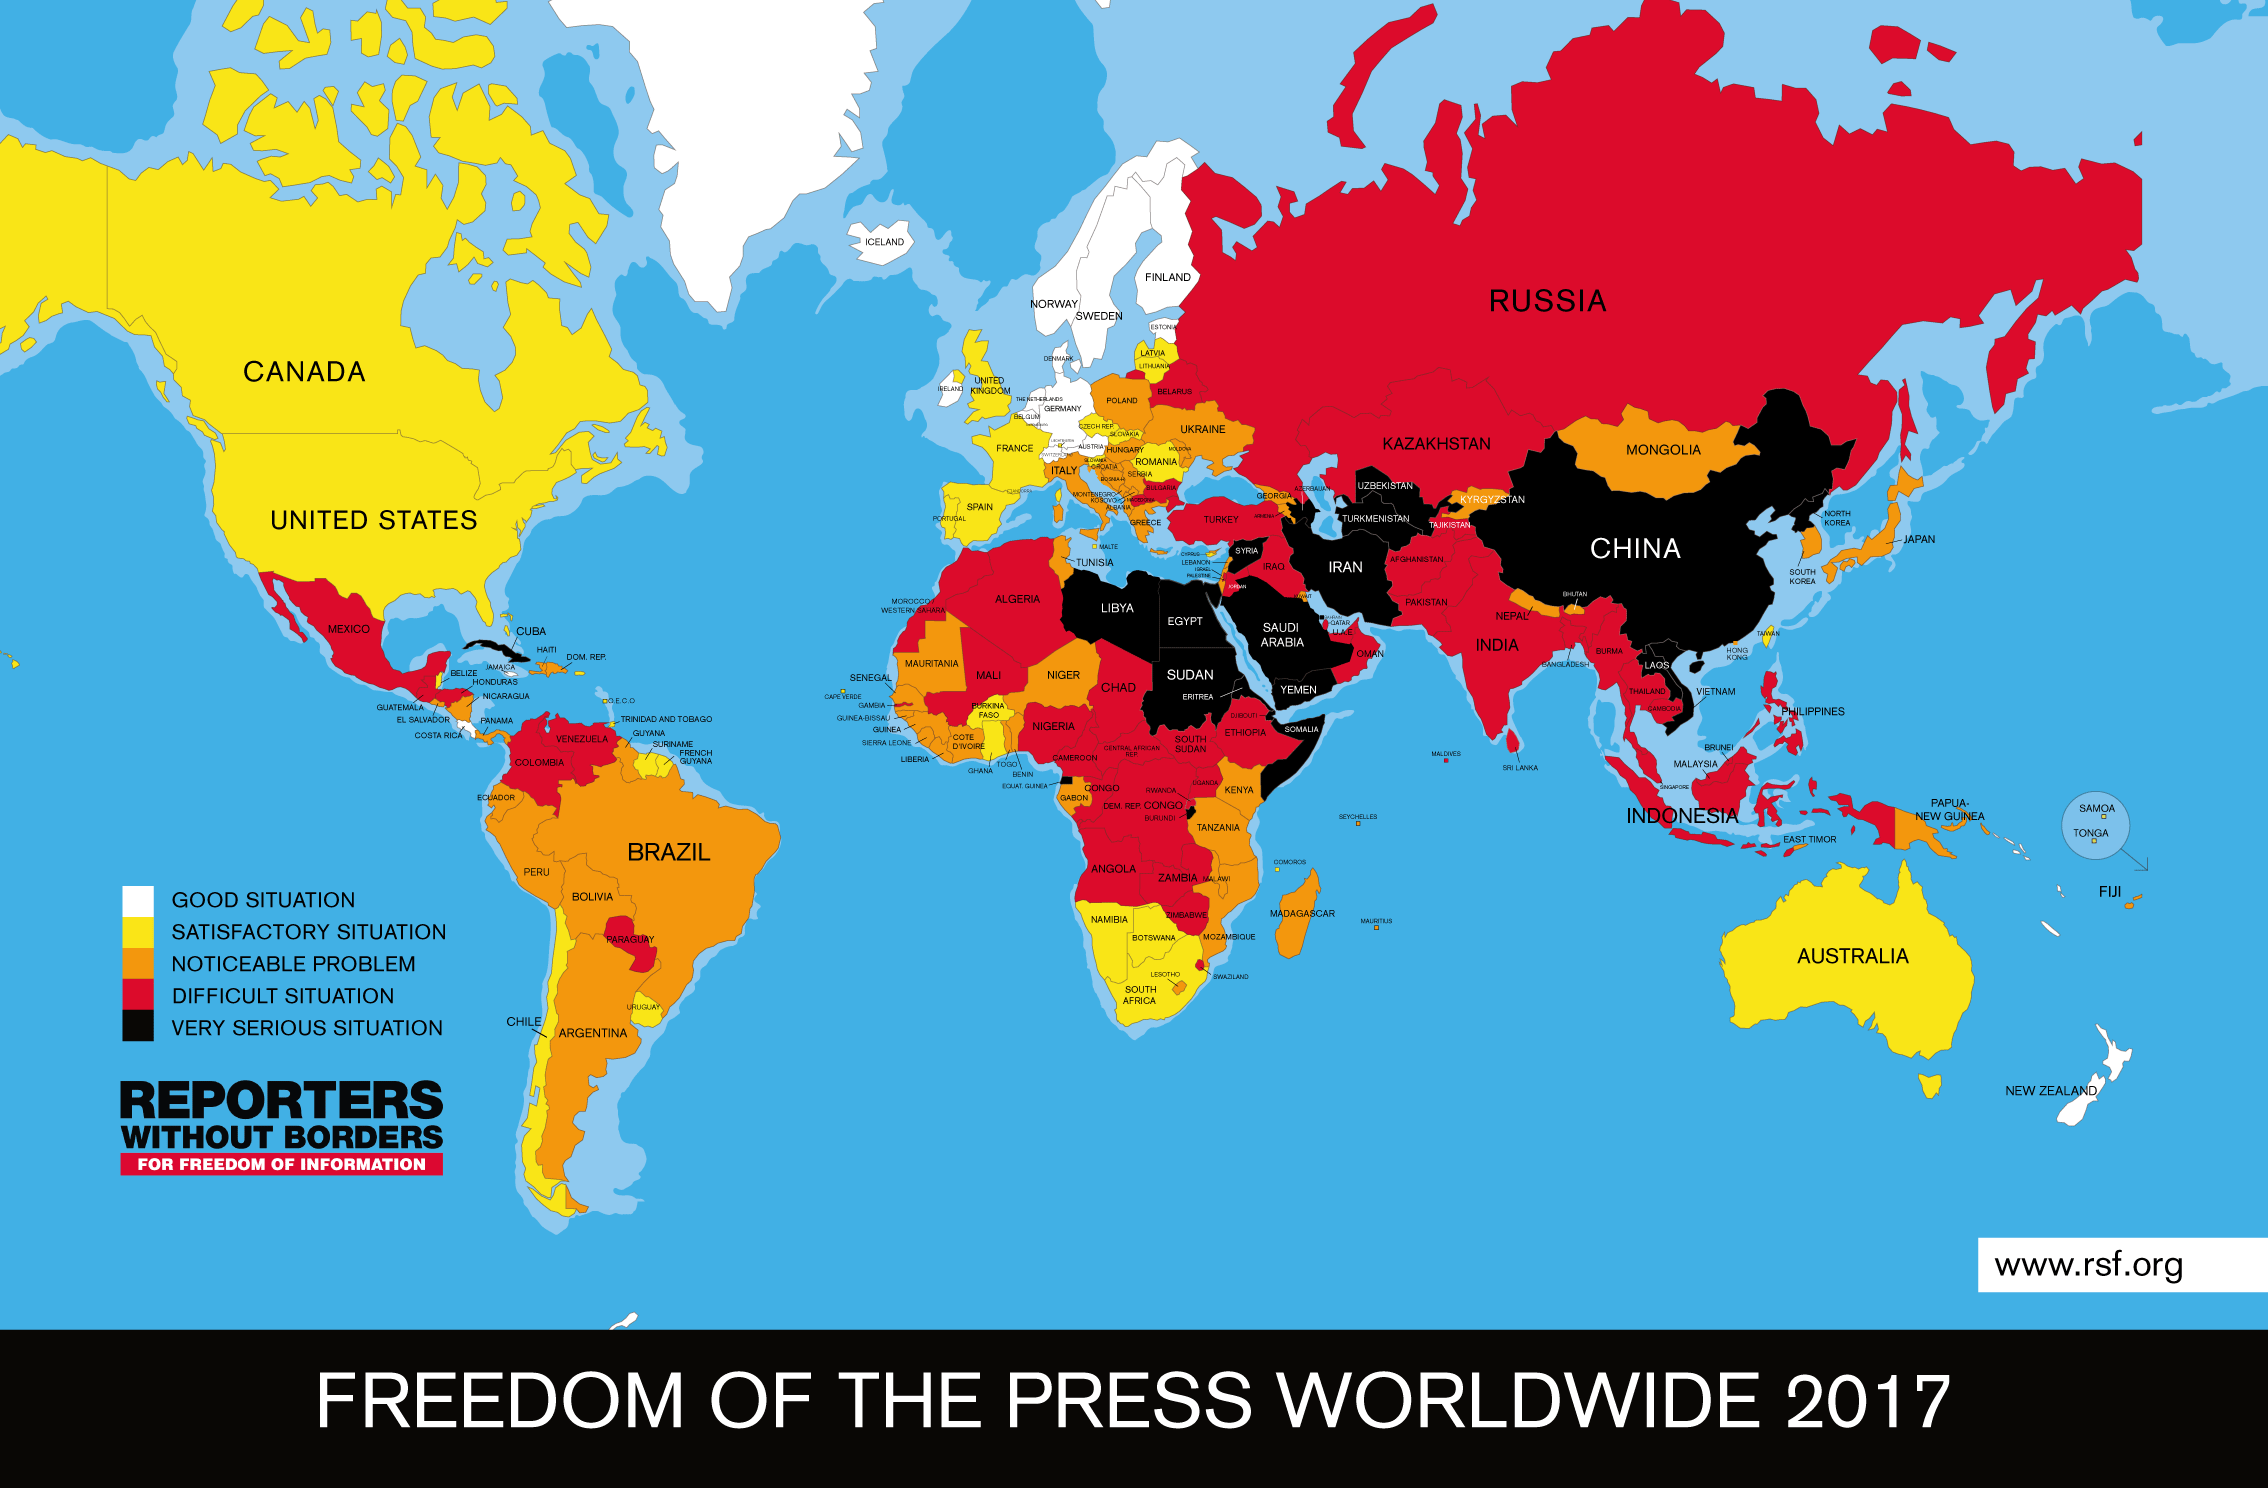 RWB 2017 press freedom league table (source: Reporters without Borders)